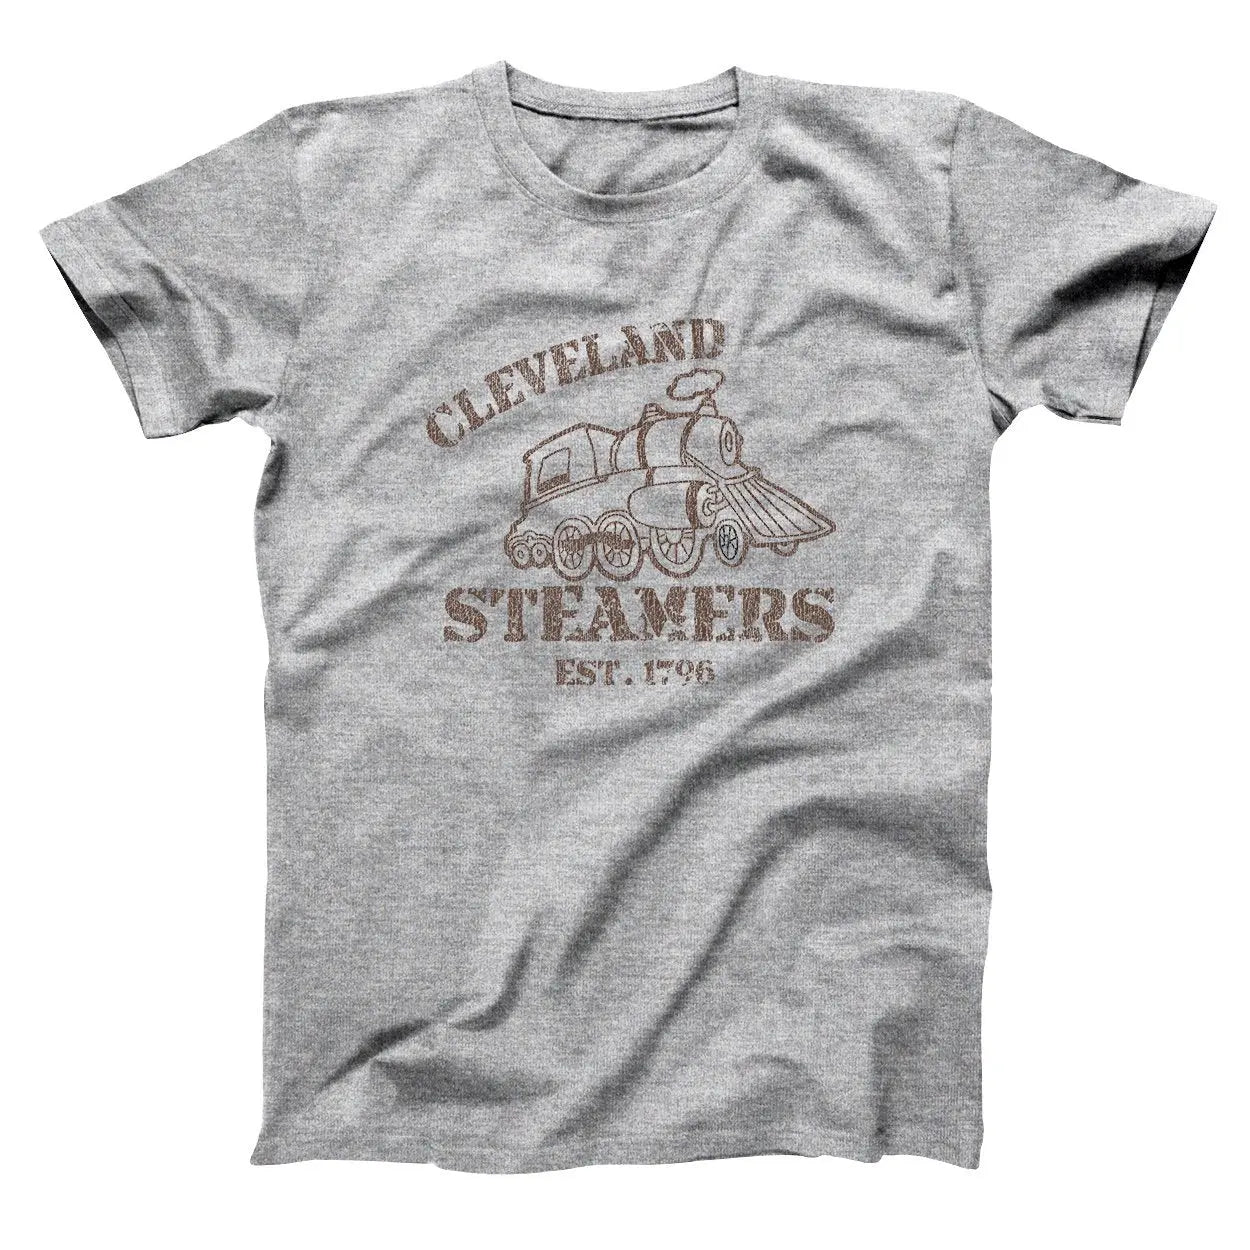 Cleveland Steamers Est 1796 Tshirt - Donkey Tees